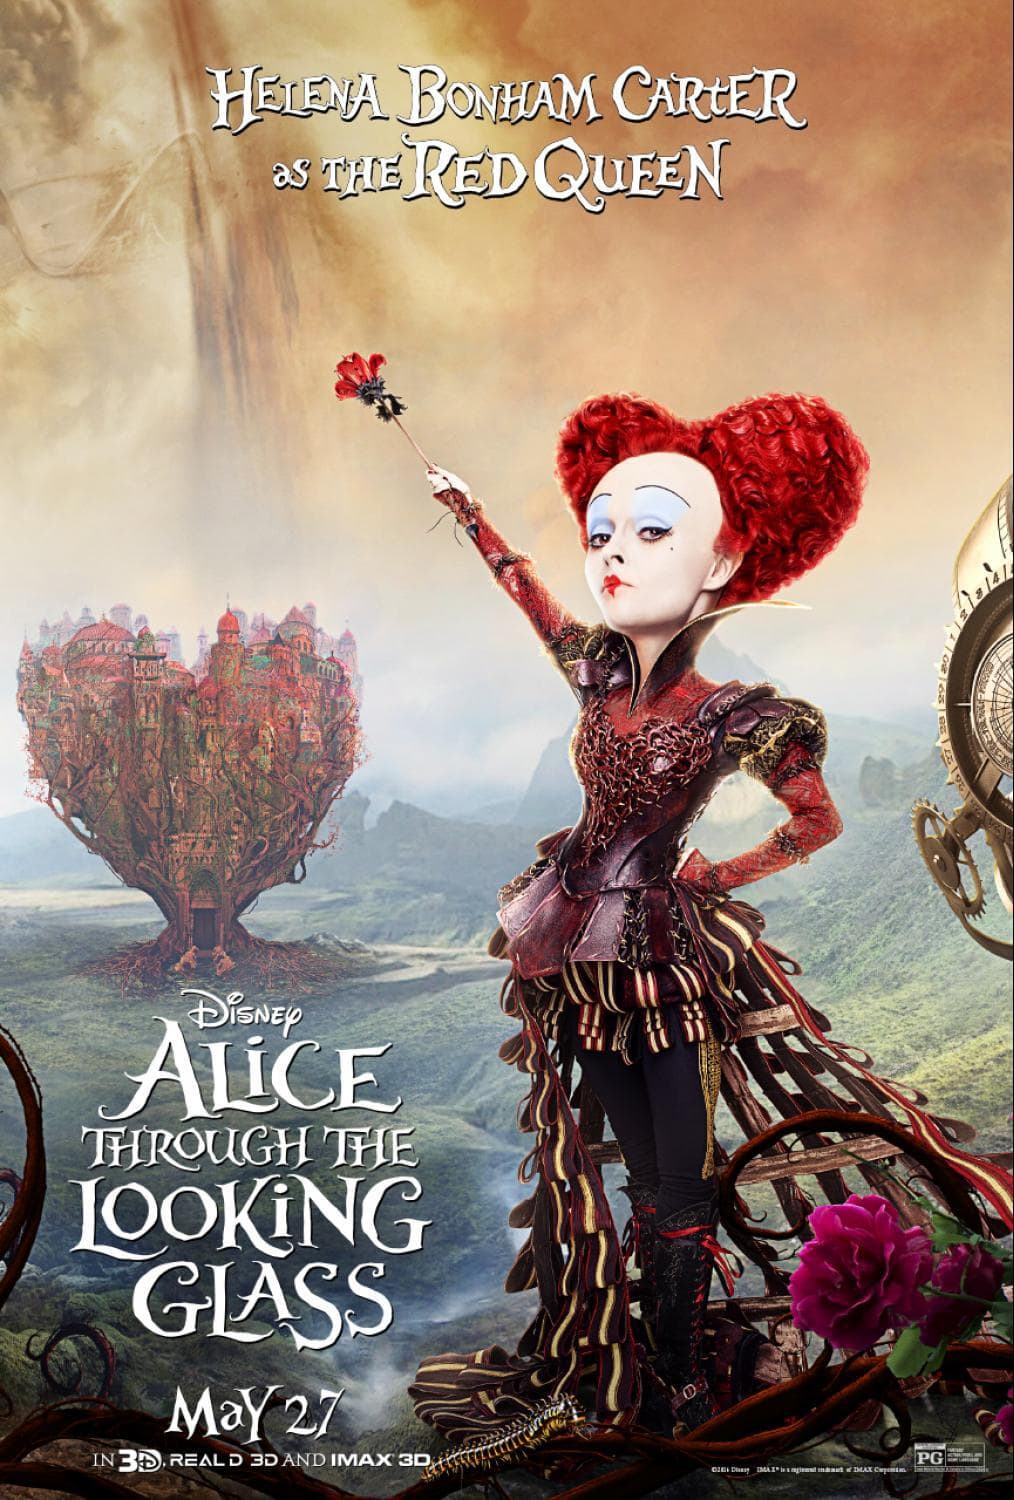 First Look: Disney's ALICE THROUGH THE LOOKING GLASS New Trailer